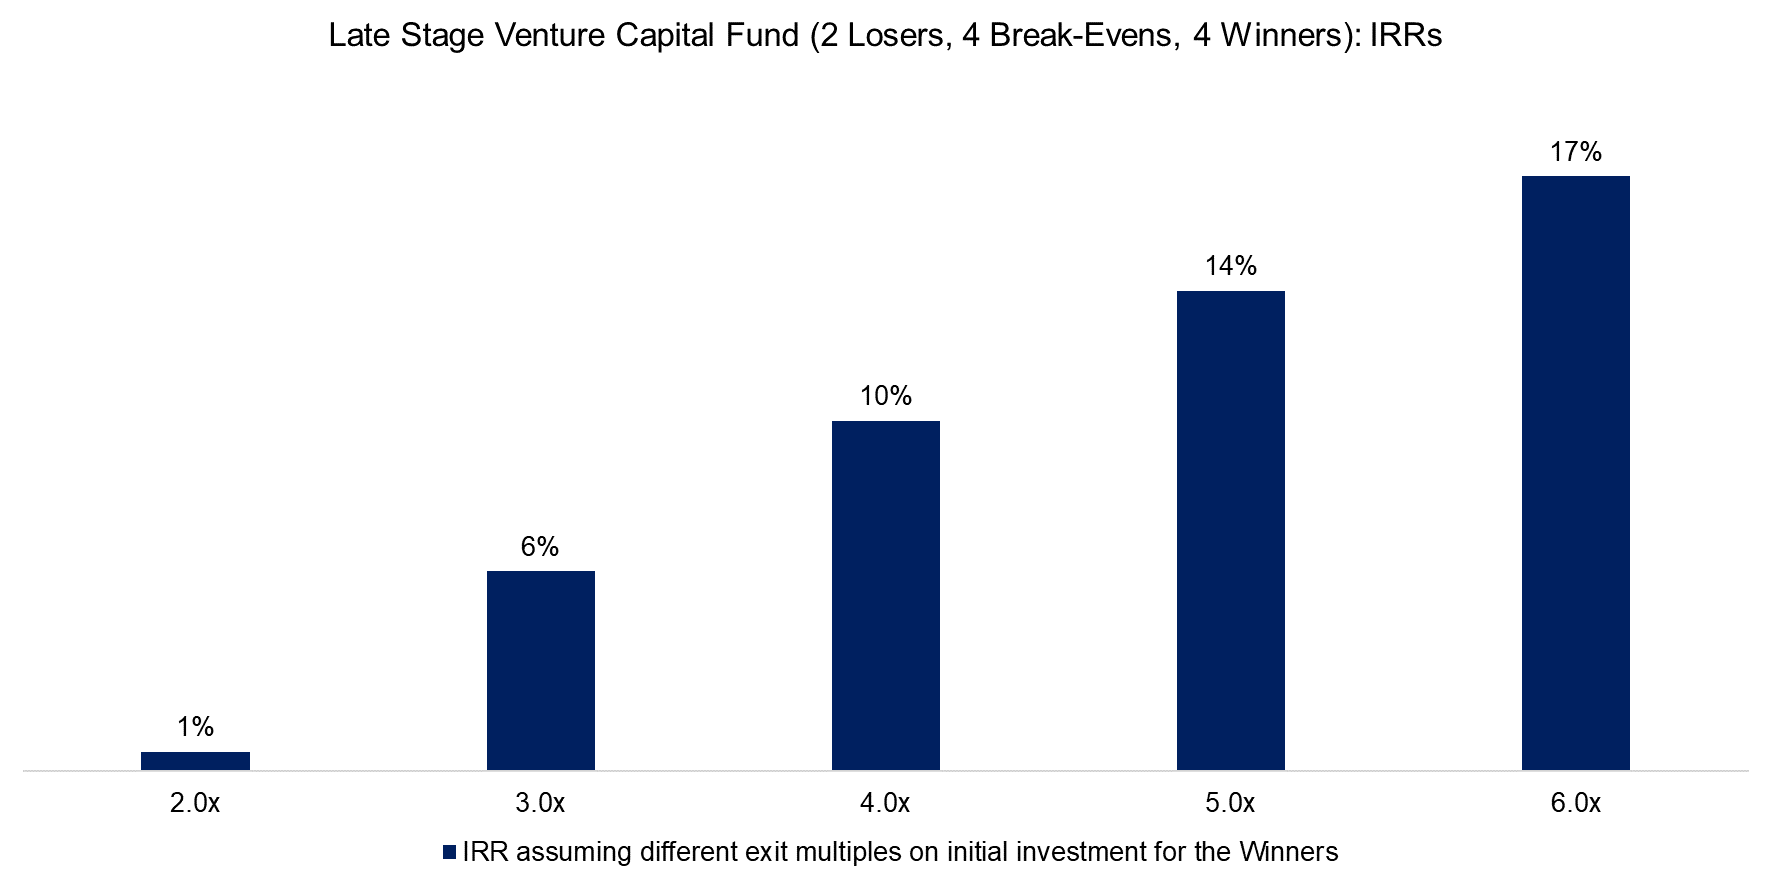 Late Stage Venture Capital Fund (2 Losers, 4 Break-Evens, 4 Winners) IRRs